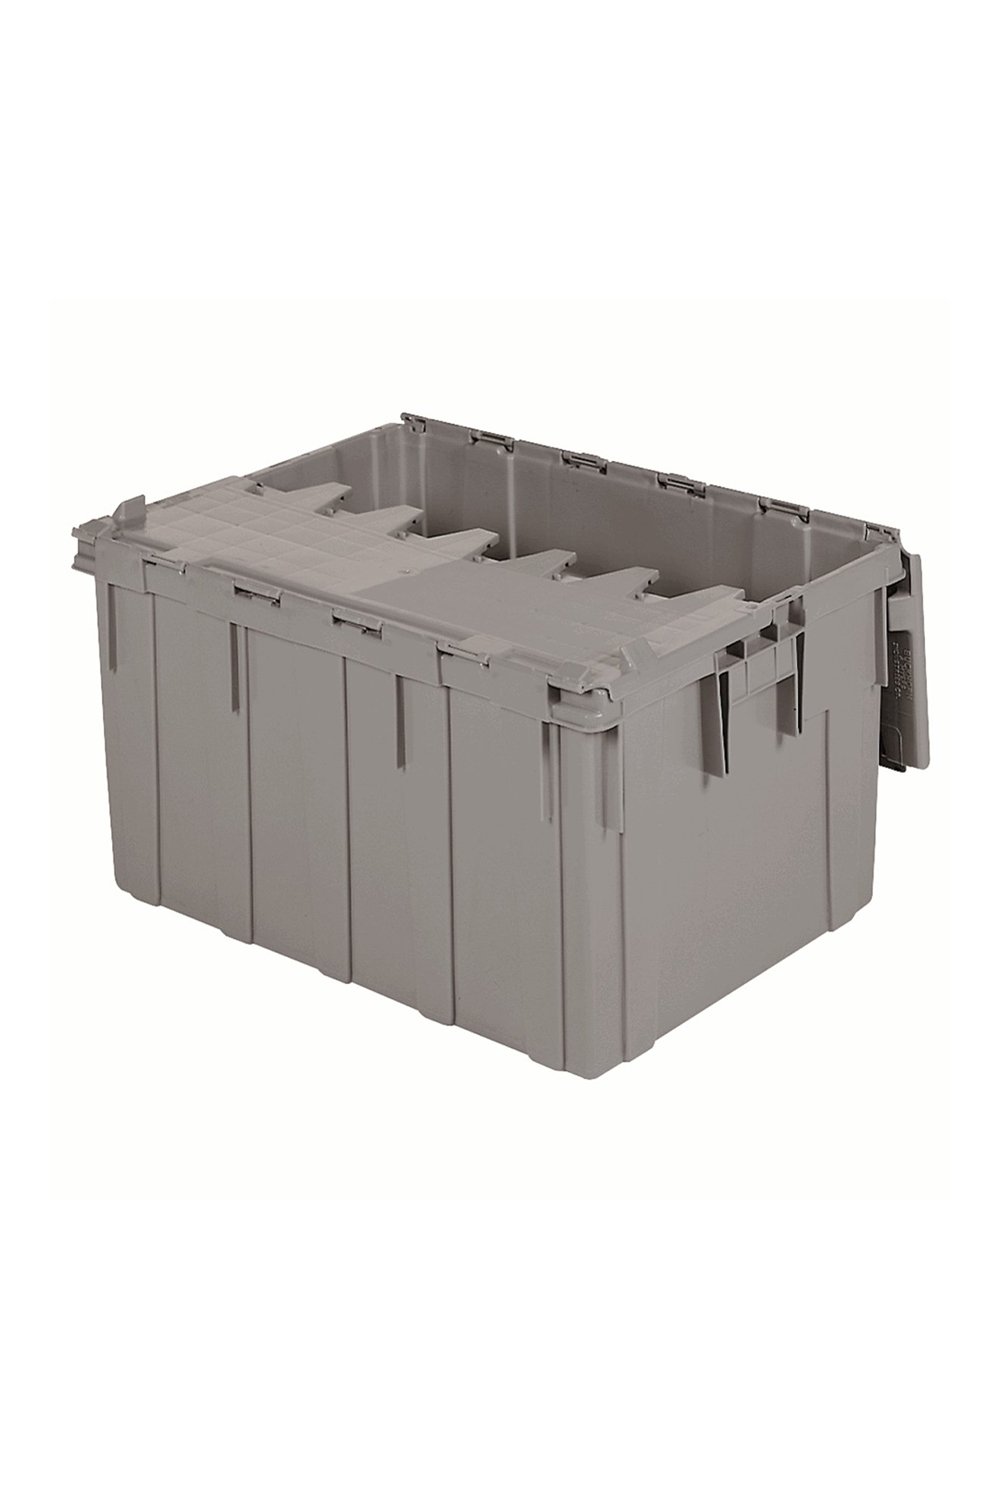 Attached Top Container Bins & Containers Acart 28"L x 20-5/8"W x 15-5/8"H Grey 